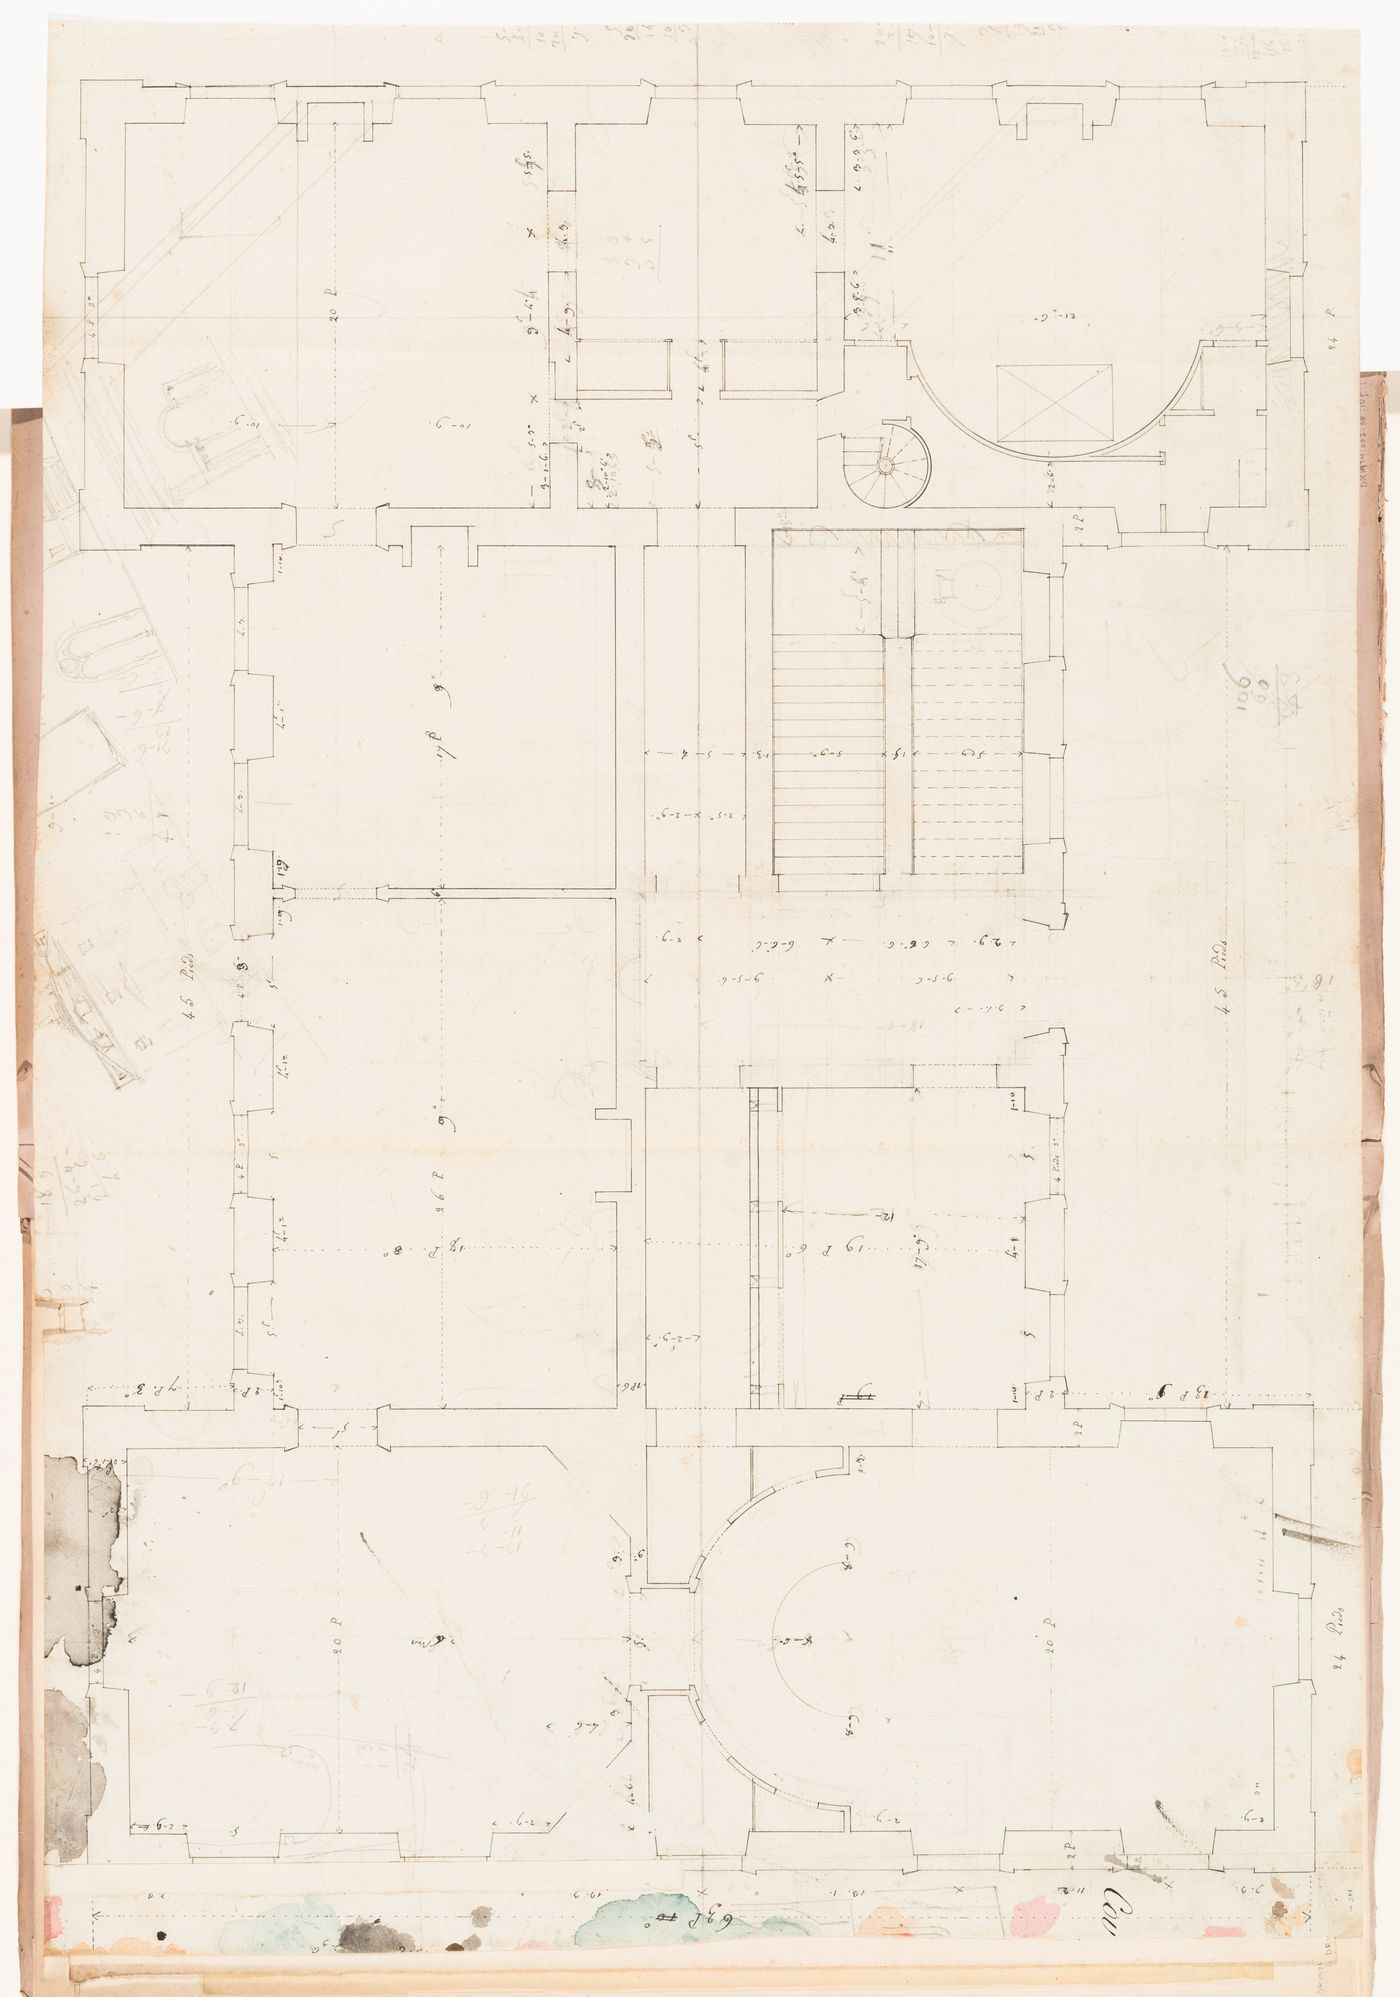 Partial ground floor plan for a country house for duc Decazes, Grave